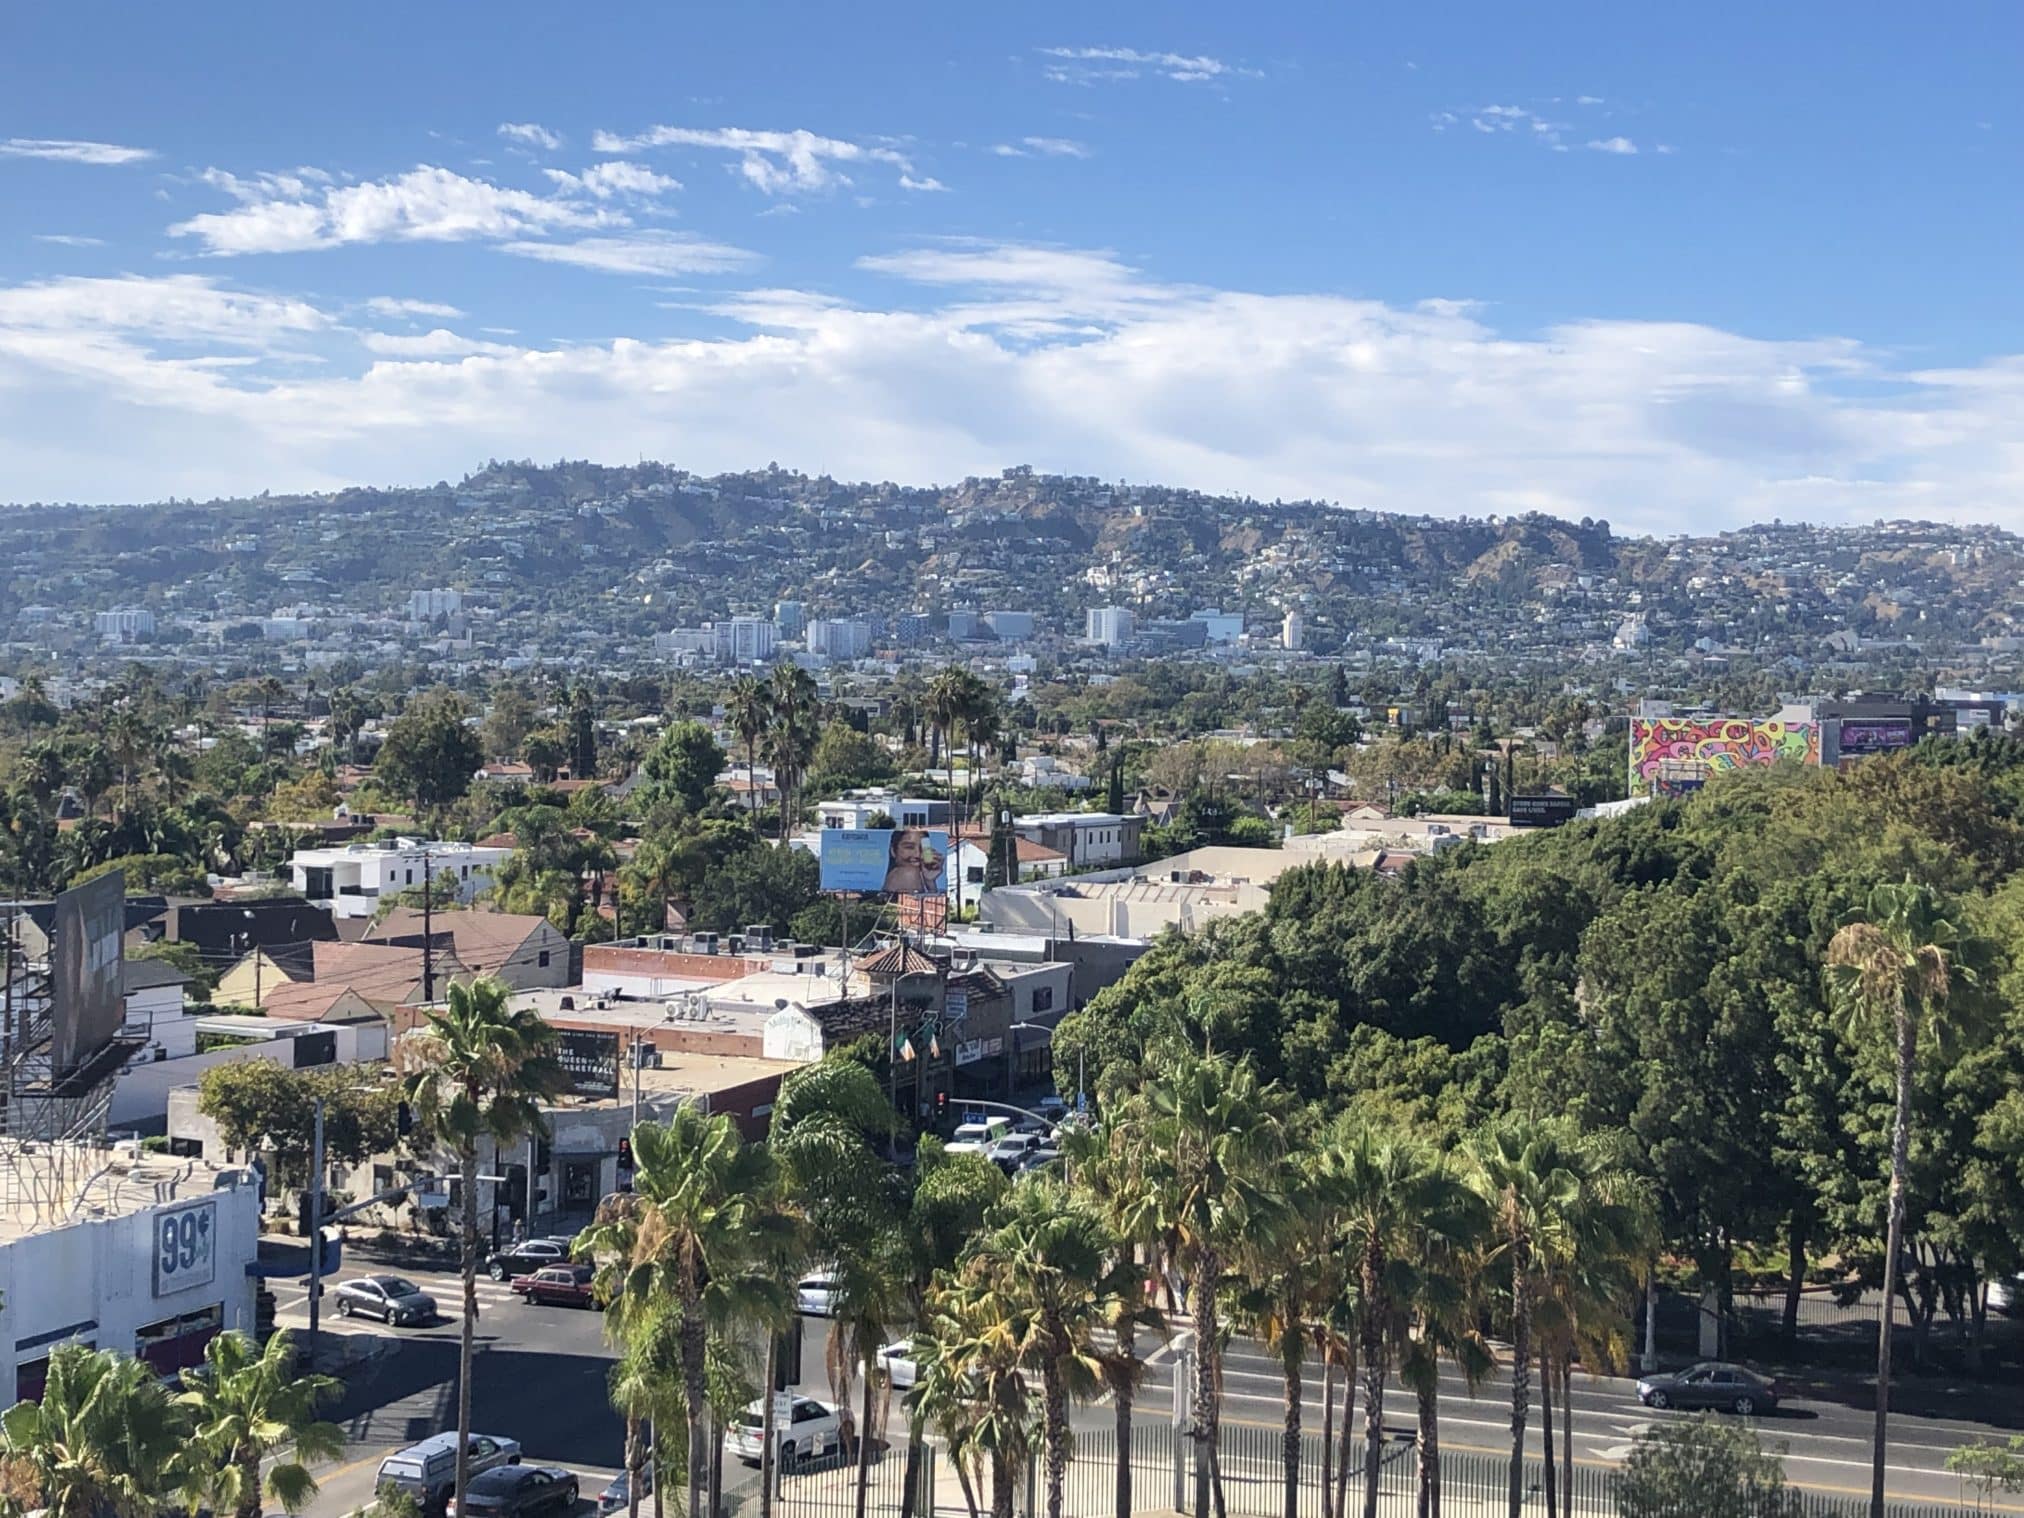 Cannabinthusiast | Los Angeles Part One: The Land of Weed and Money - Los Angeles Cityscape